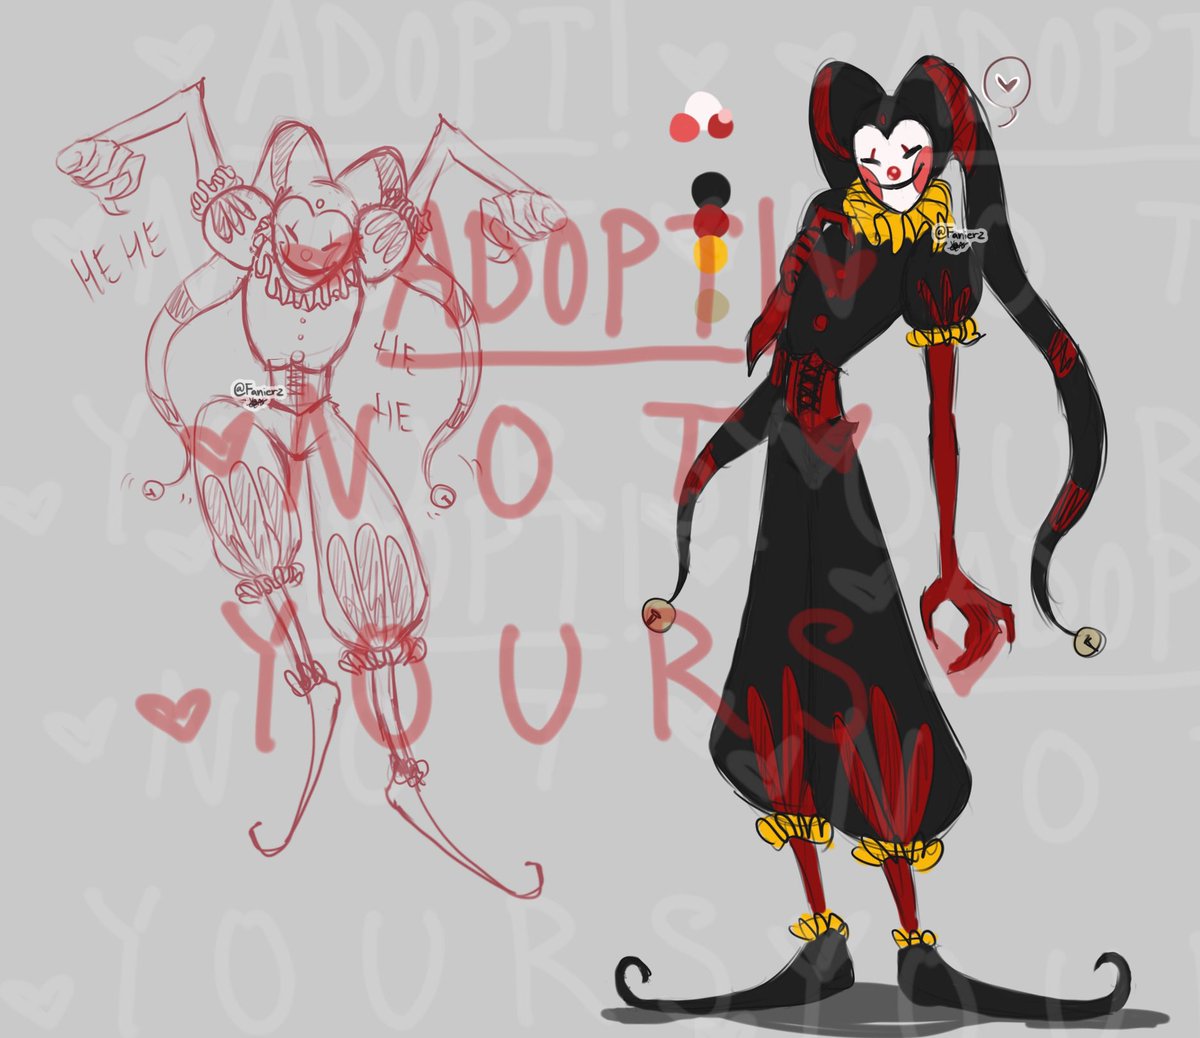 Making some adopts, this dude is up for sale and up for trade if anyone is interested, he comes with a chibi sketch, he’s worth $40. (I also do customs $) #oc #adopts #adopt #ocadopt #adoptoc #adoptables #jester